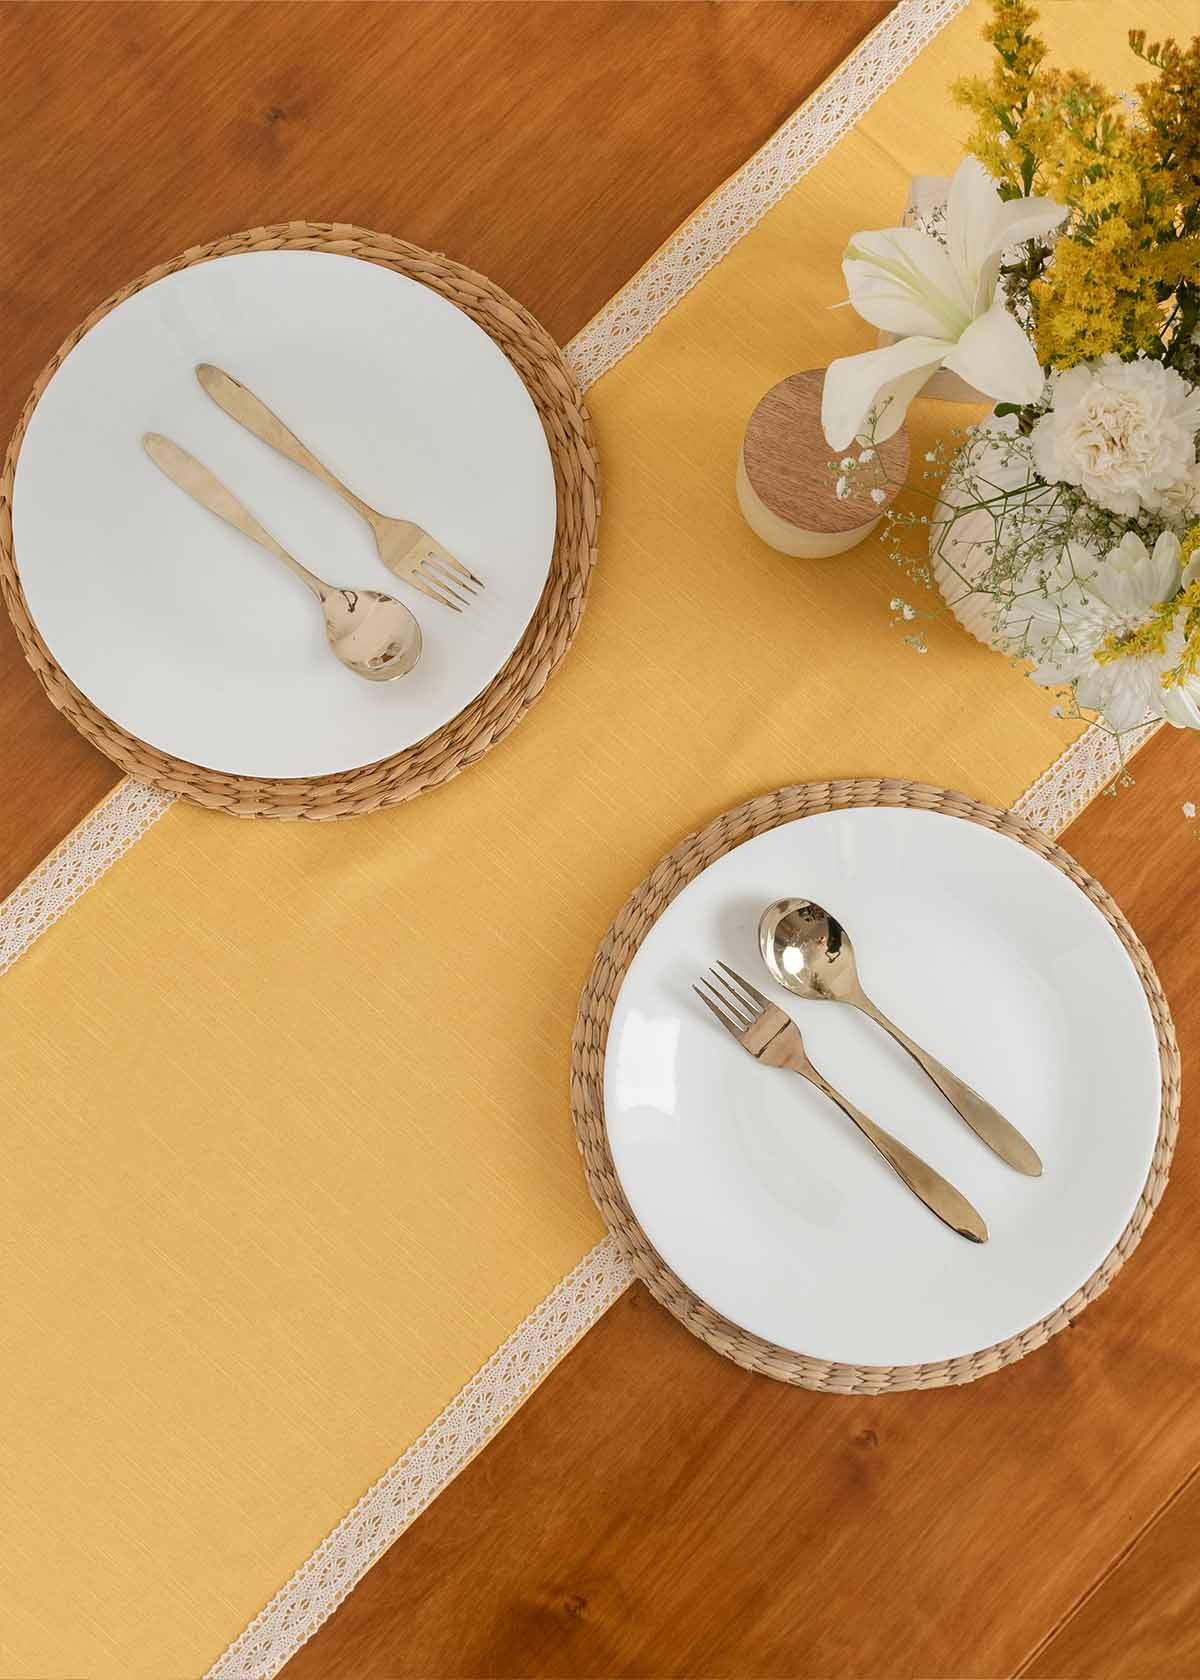 Solid Mustard 100% cotton plain table runner for 4 seater or 6 seater dining with lace boarder - Mustard